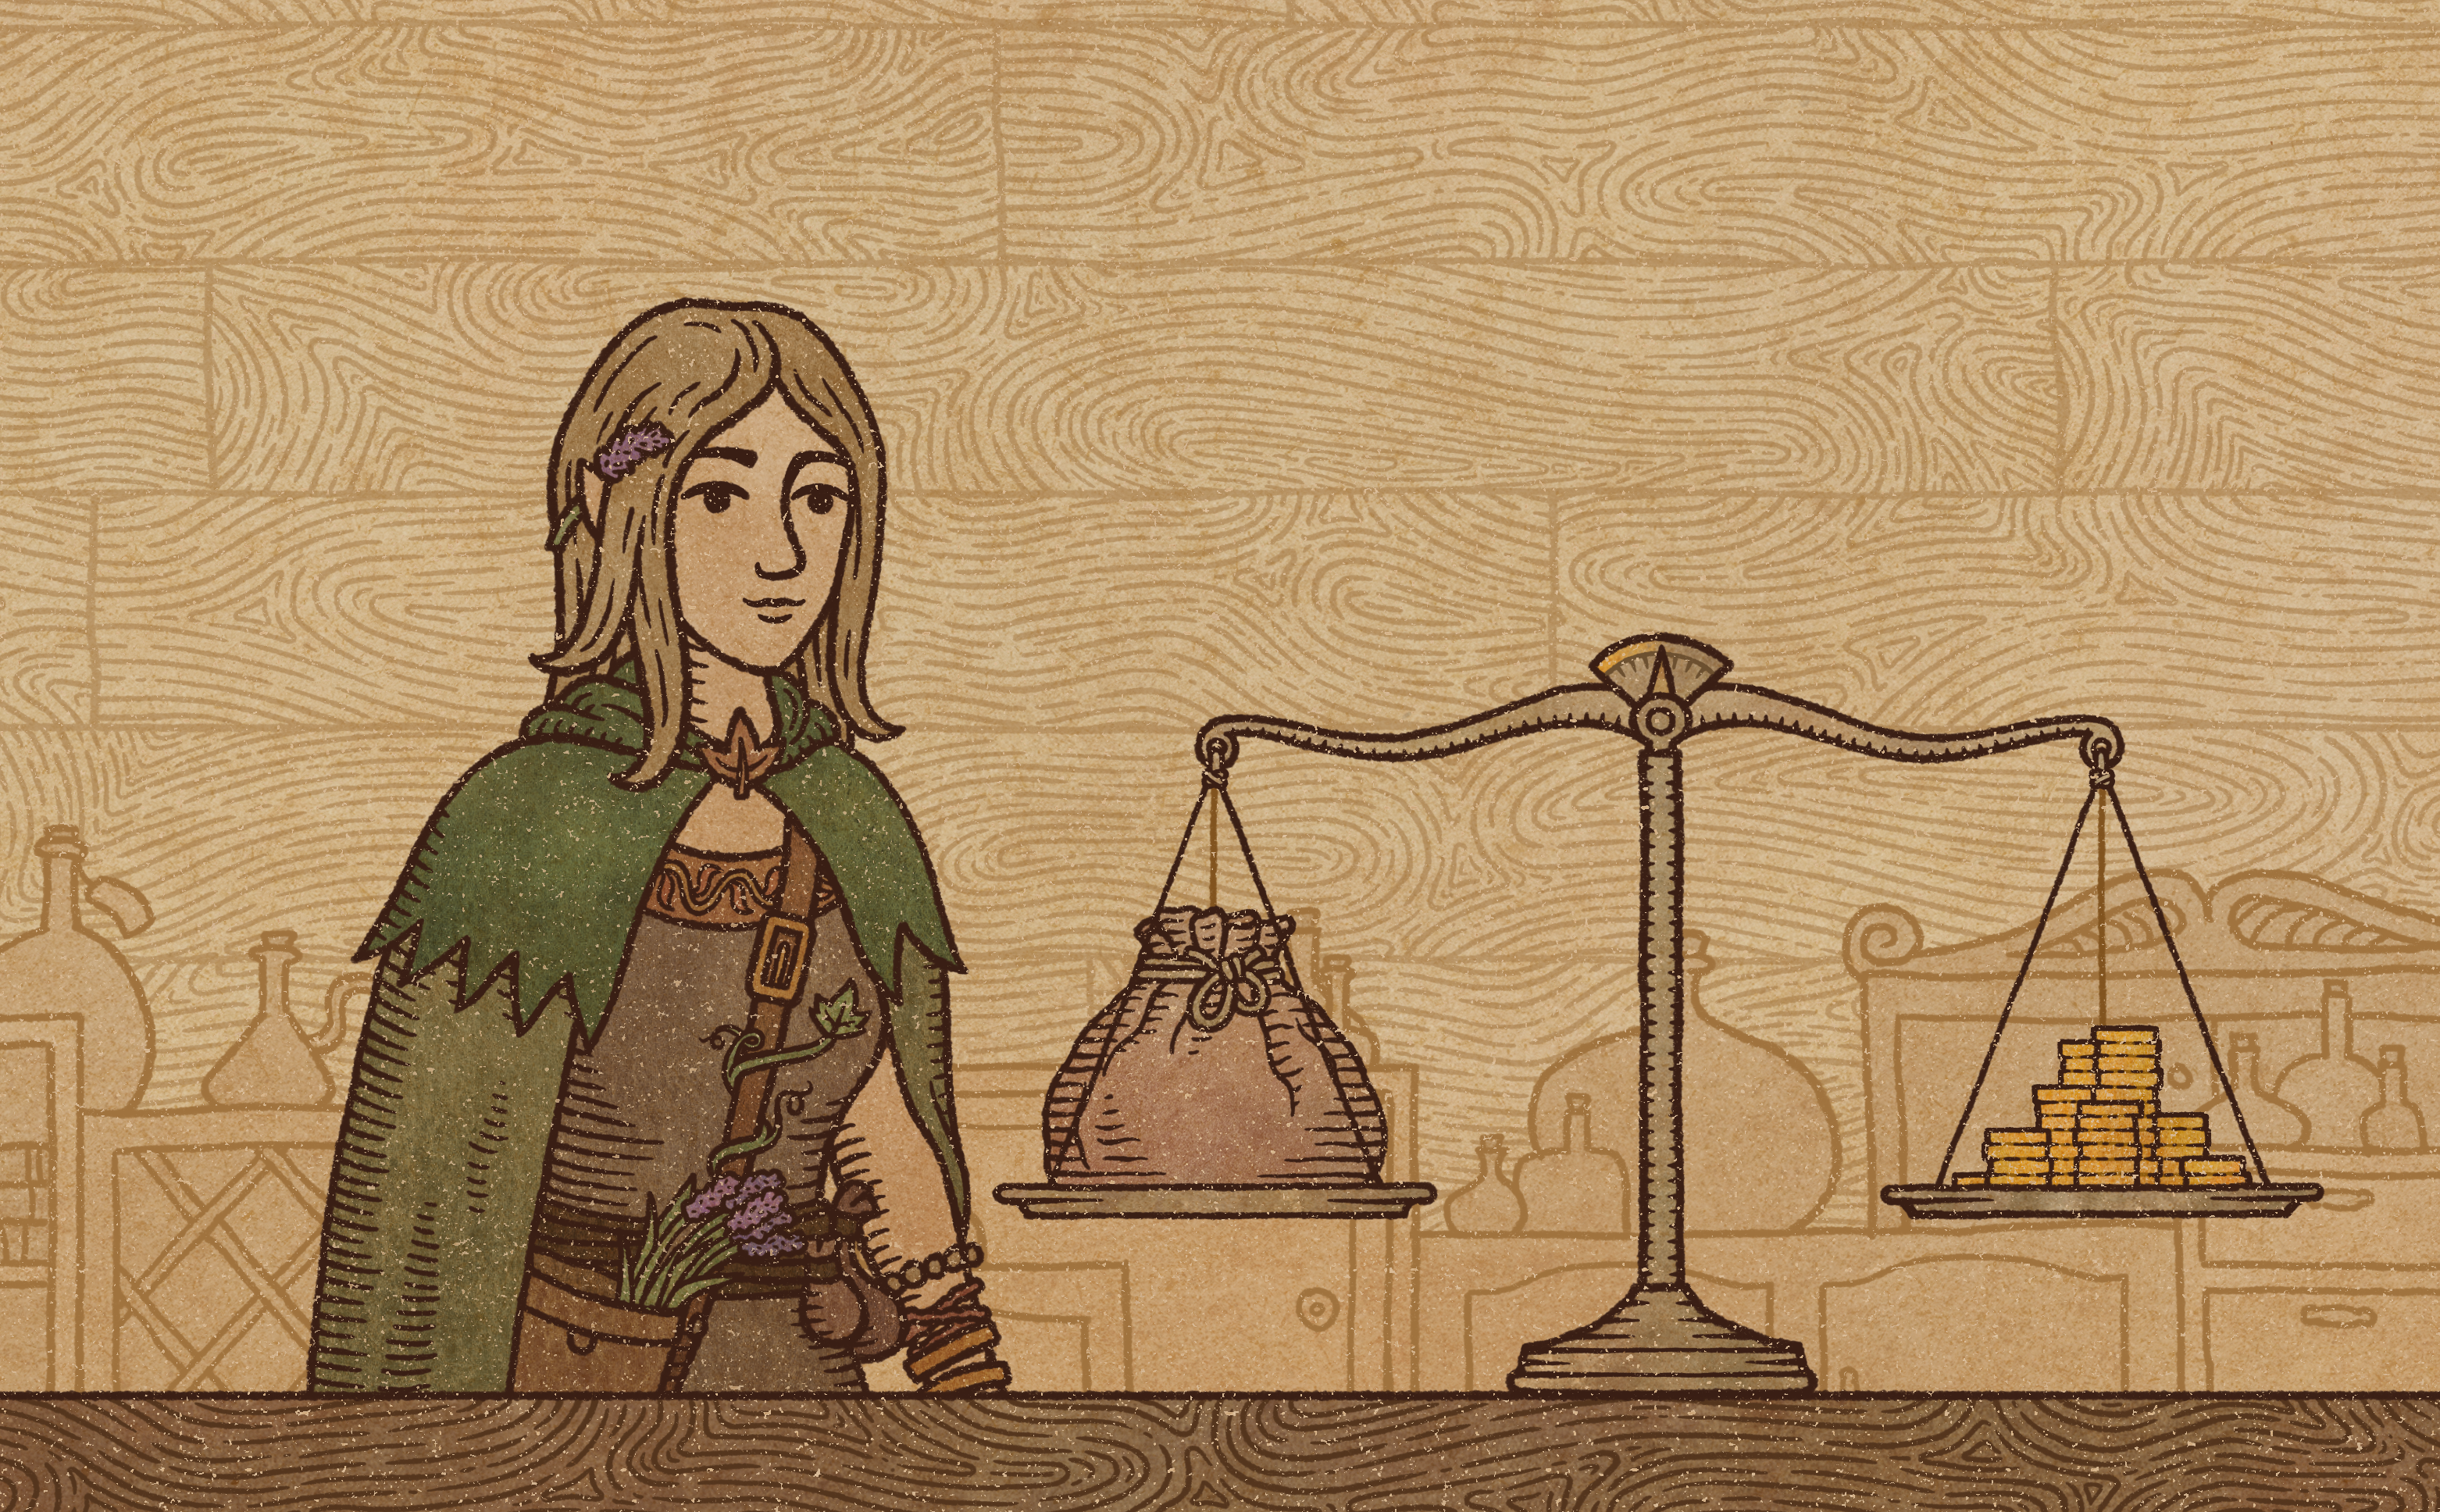 HD desktop wallpaper featuring an alchemist from Potion Craft: Alchemist Simulator, with scales and potion bottles in the background.